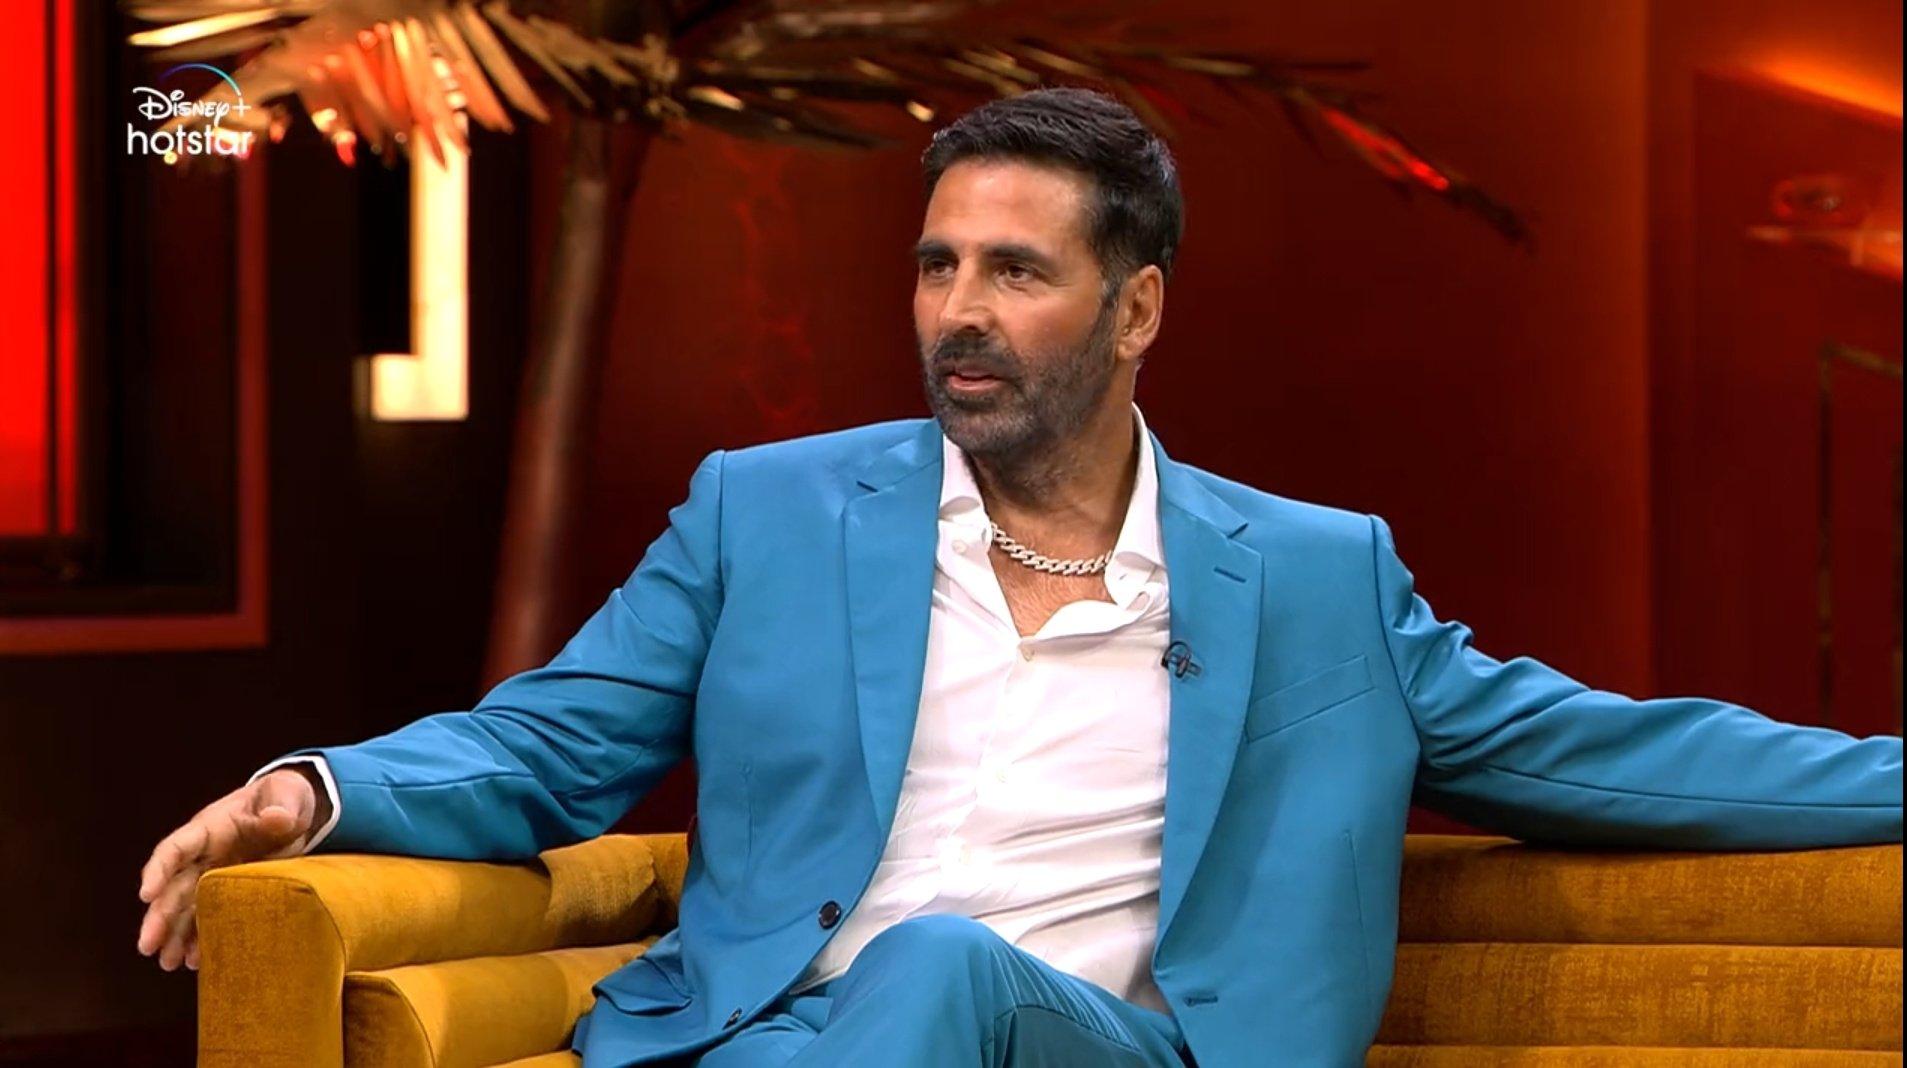 Akshay on being called 'Canada Kumar' and criticism on romancing younger actresses
When Karan Johar asked Akshay Kumar what's the worst thing he has read about himself, he said, 